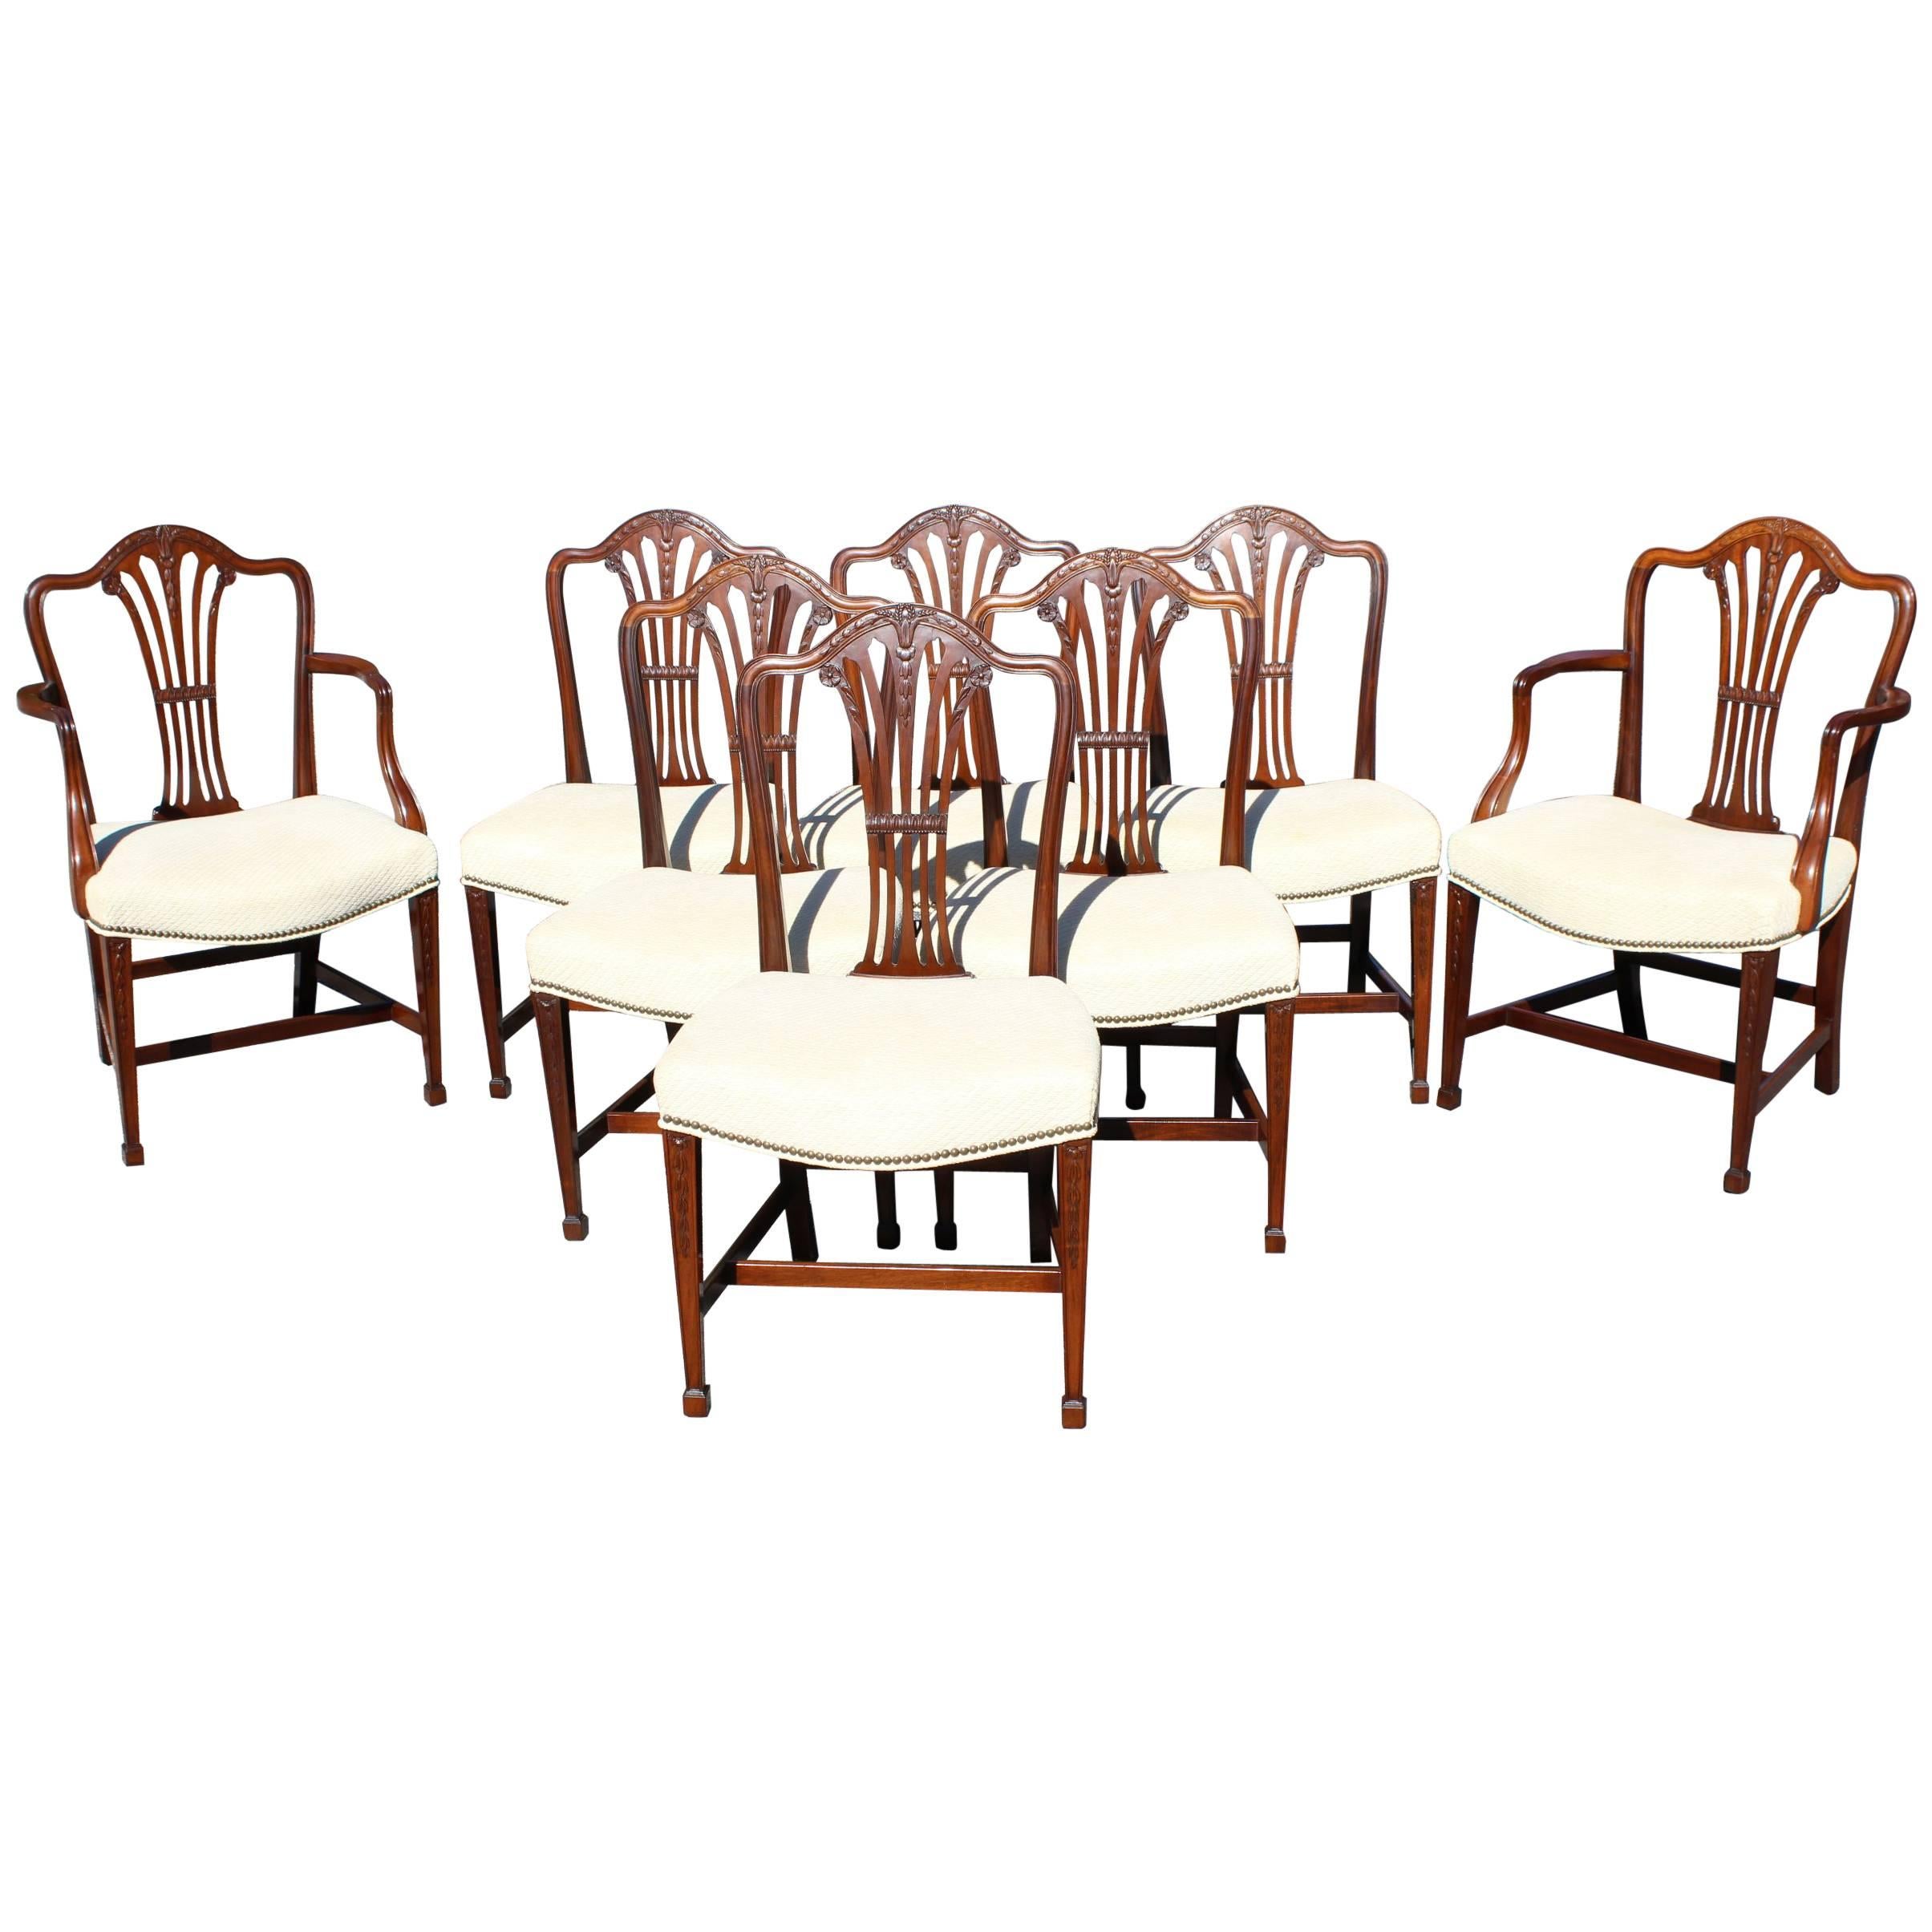 Set of Eight Irving & Casson/A.H. Davenport Mahogany Dining Chars